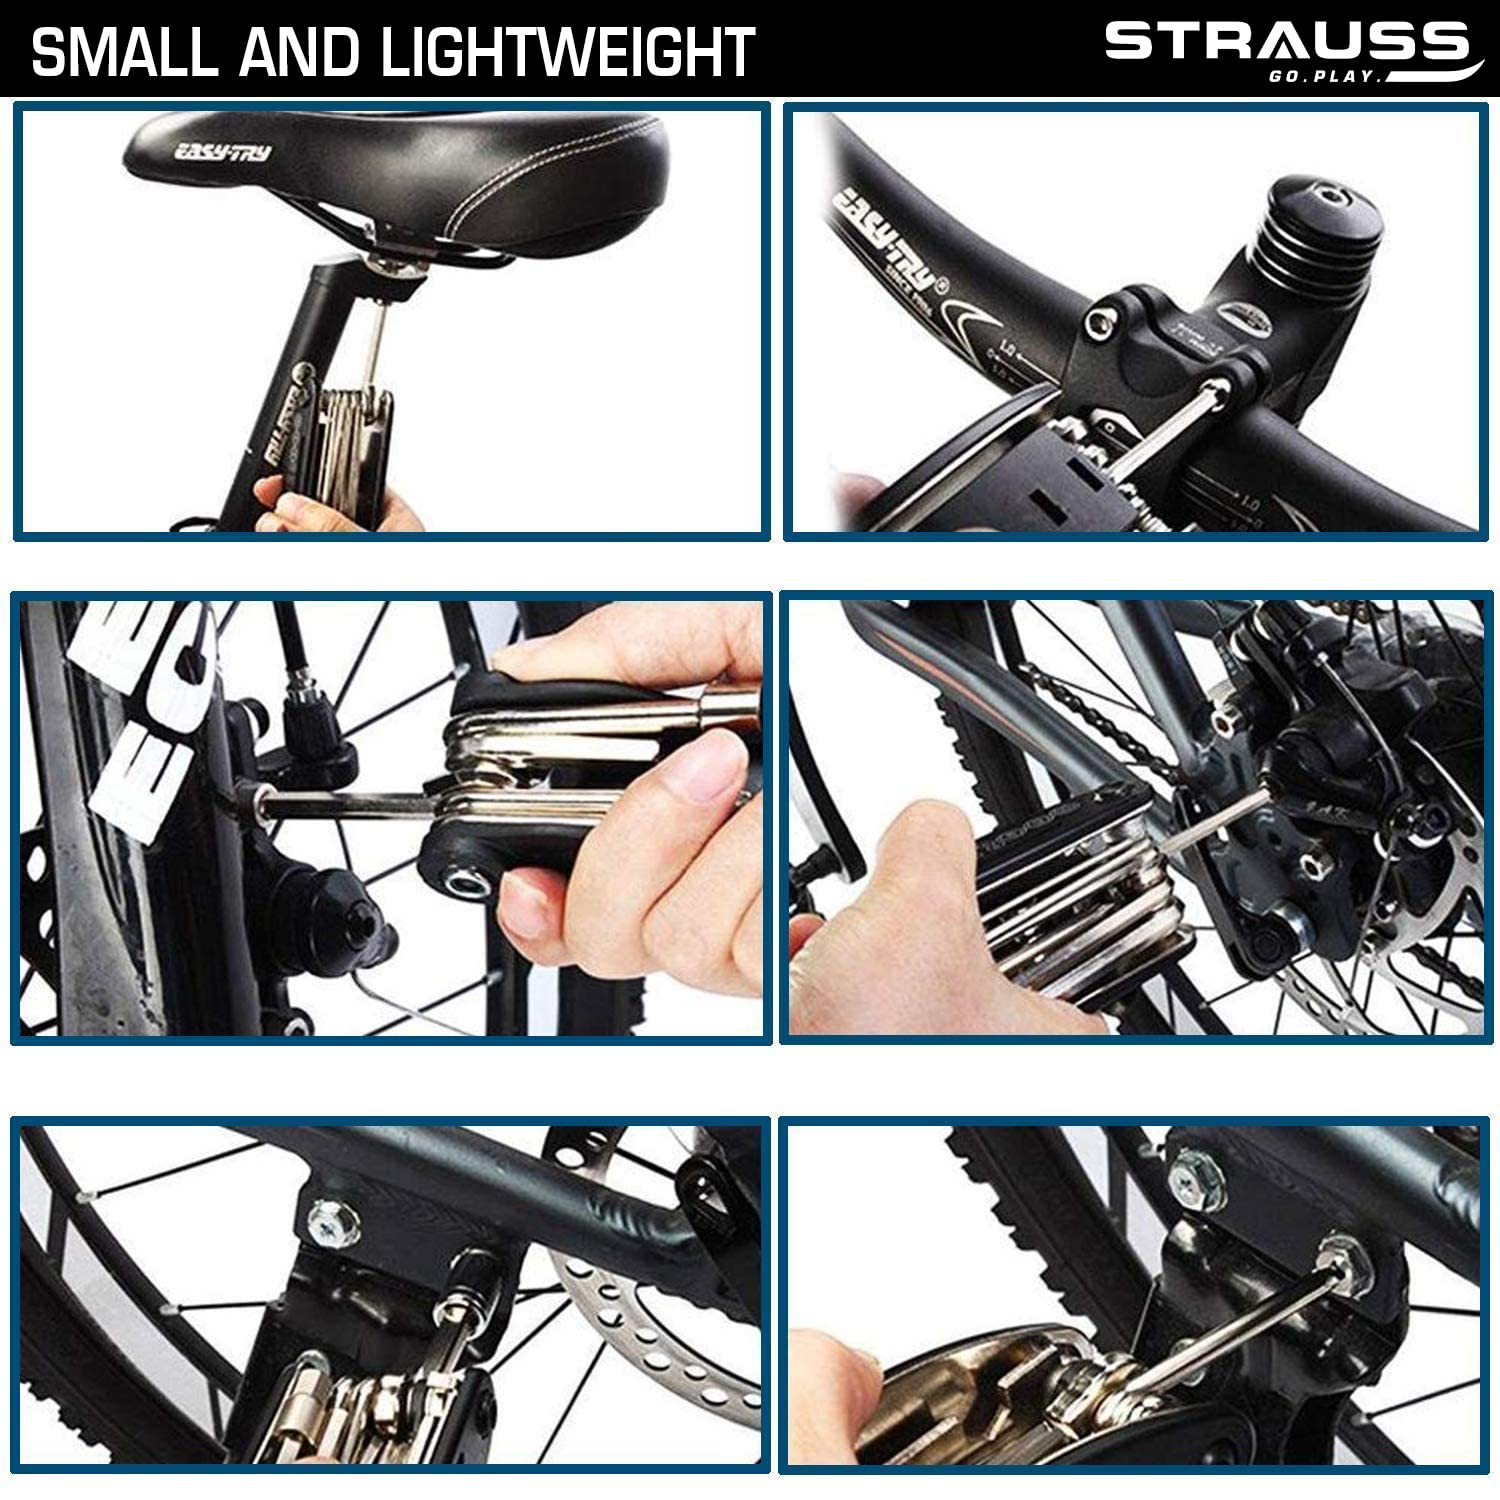 Strauss Bicycle Repair Tool Kit | 16 in 1 Multi-Functional Kit with Screwdrivers, Wrenches, Spanners, Nail Puller & Extension Rod | Portable & Compact